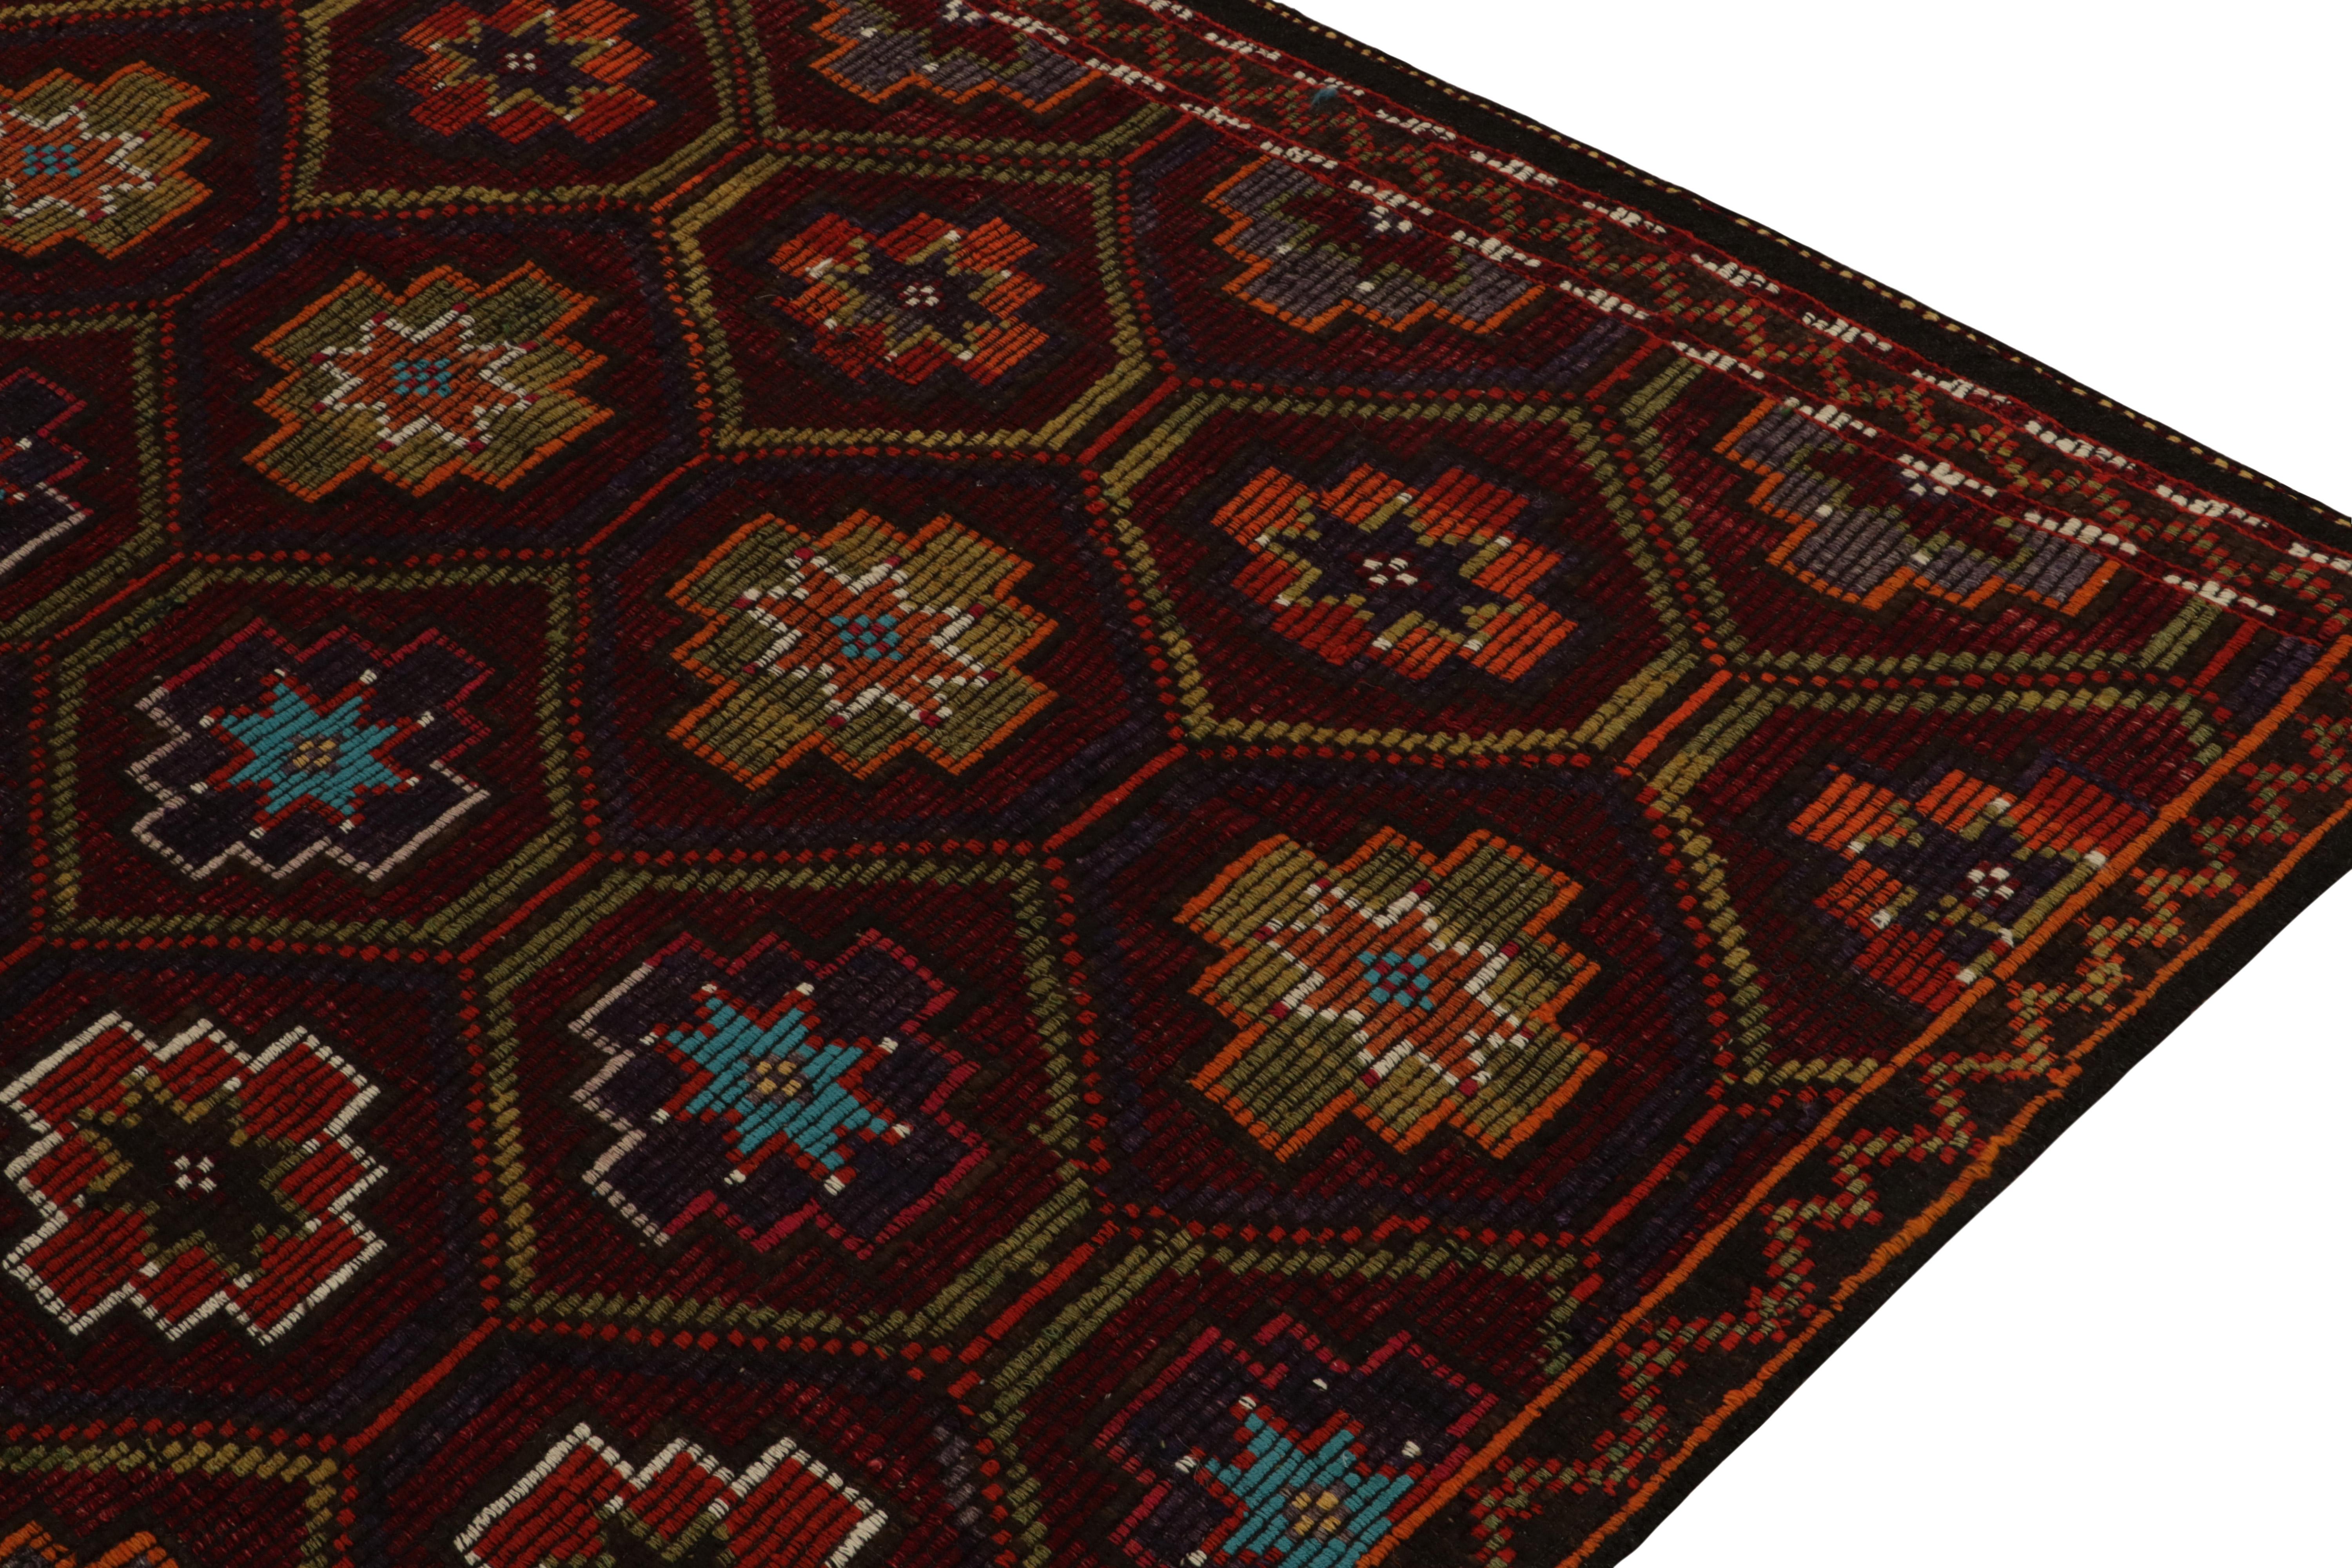 Mid-20th Century Vintage Cecim Tribal Kilim Rug in Red, Multicolor Geometric Pattern For Sale